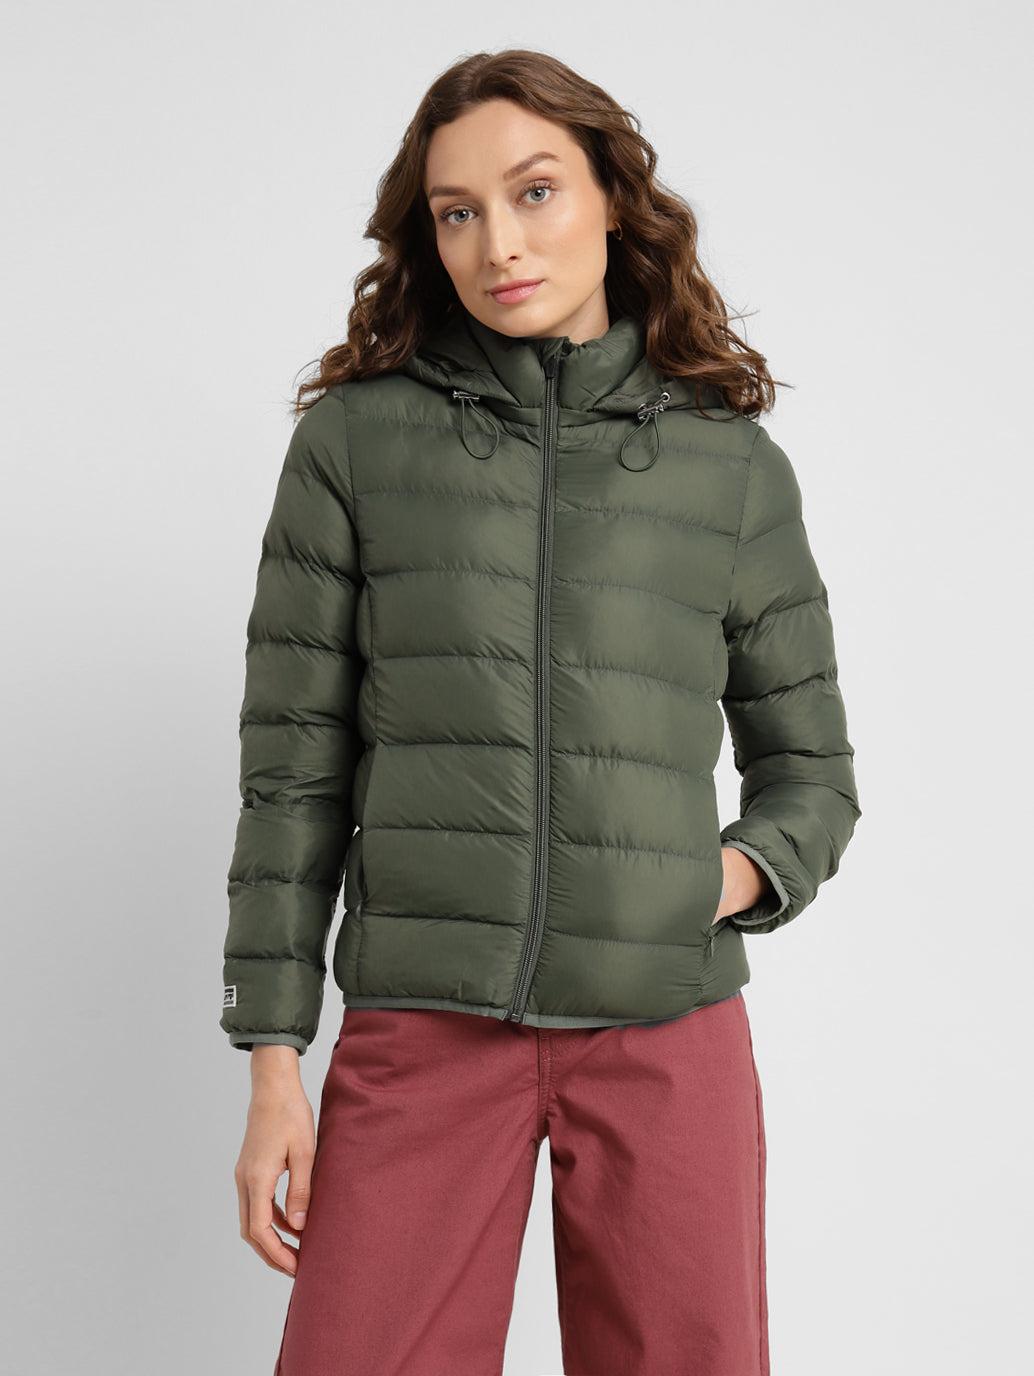 Womens Solid Hooded Jacket Olive 